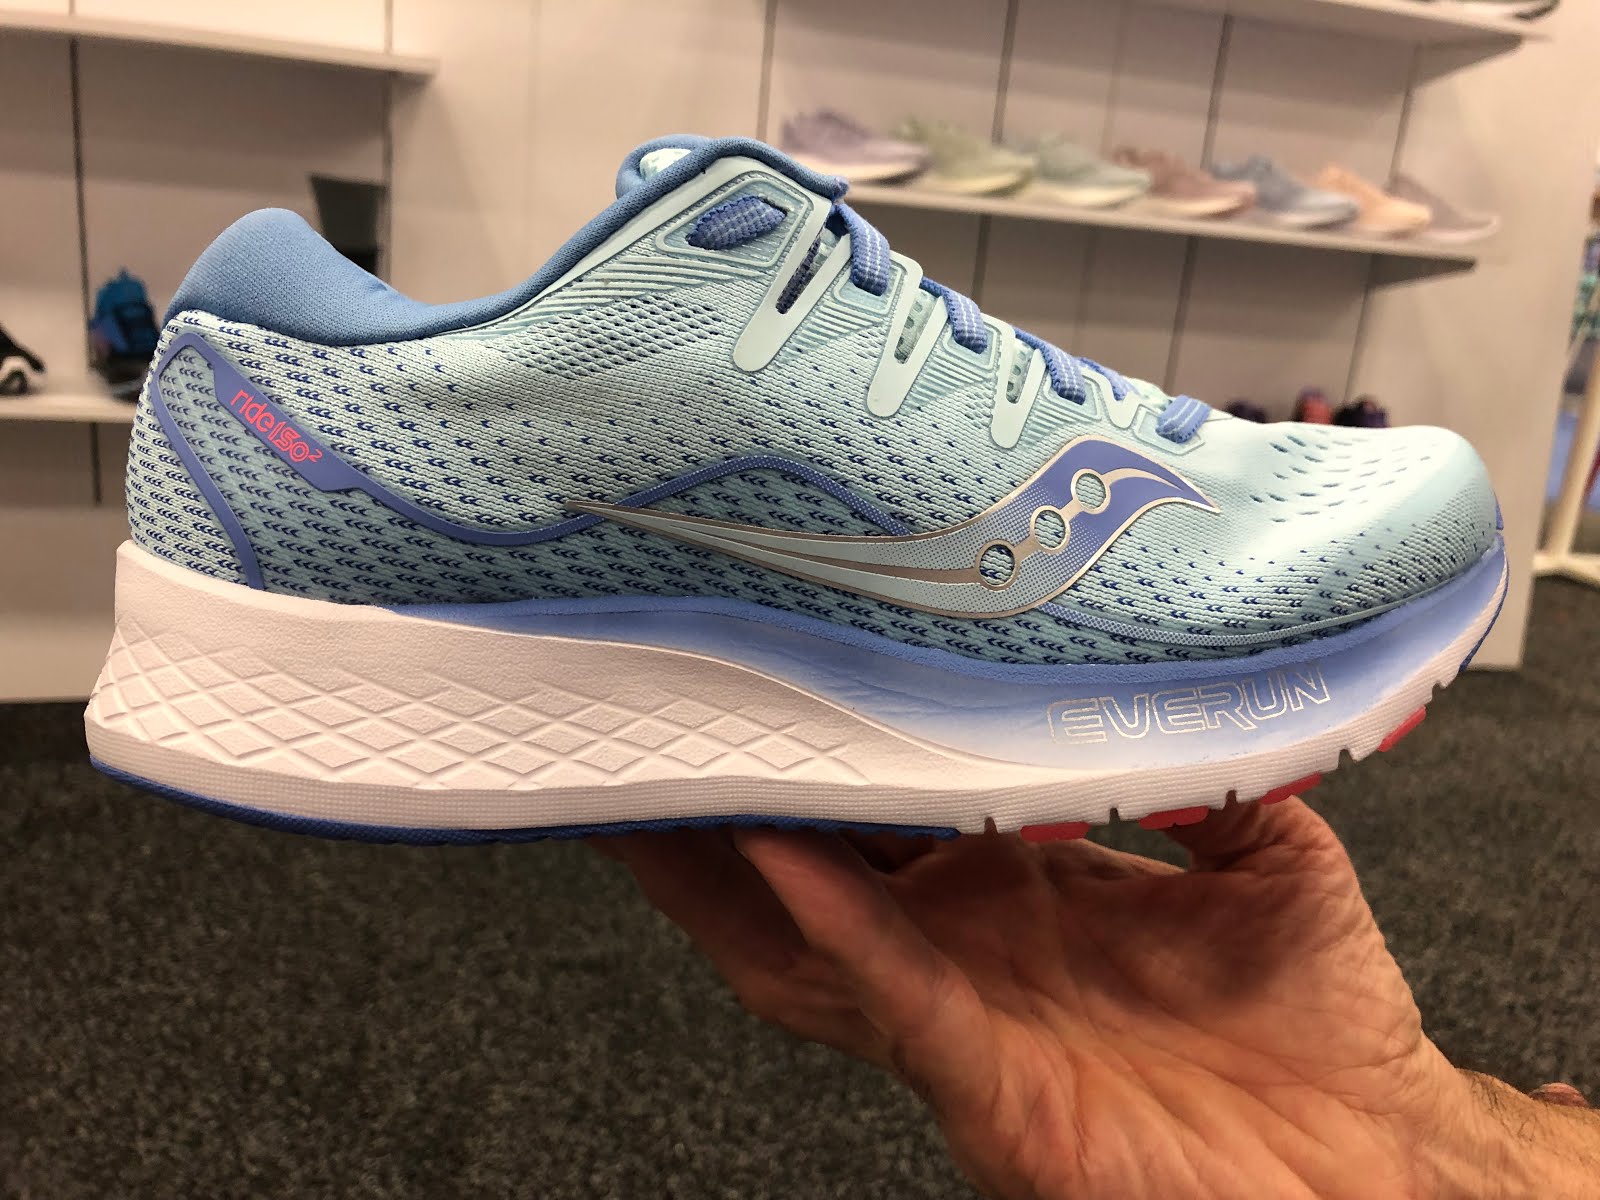 Deplete Ie gasoline Road Trail Run: Saucony 2019 Run Shoe Previews: Liberty ISO 2, Ride ISO 2 &  Mad River TR